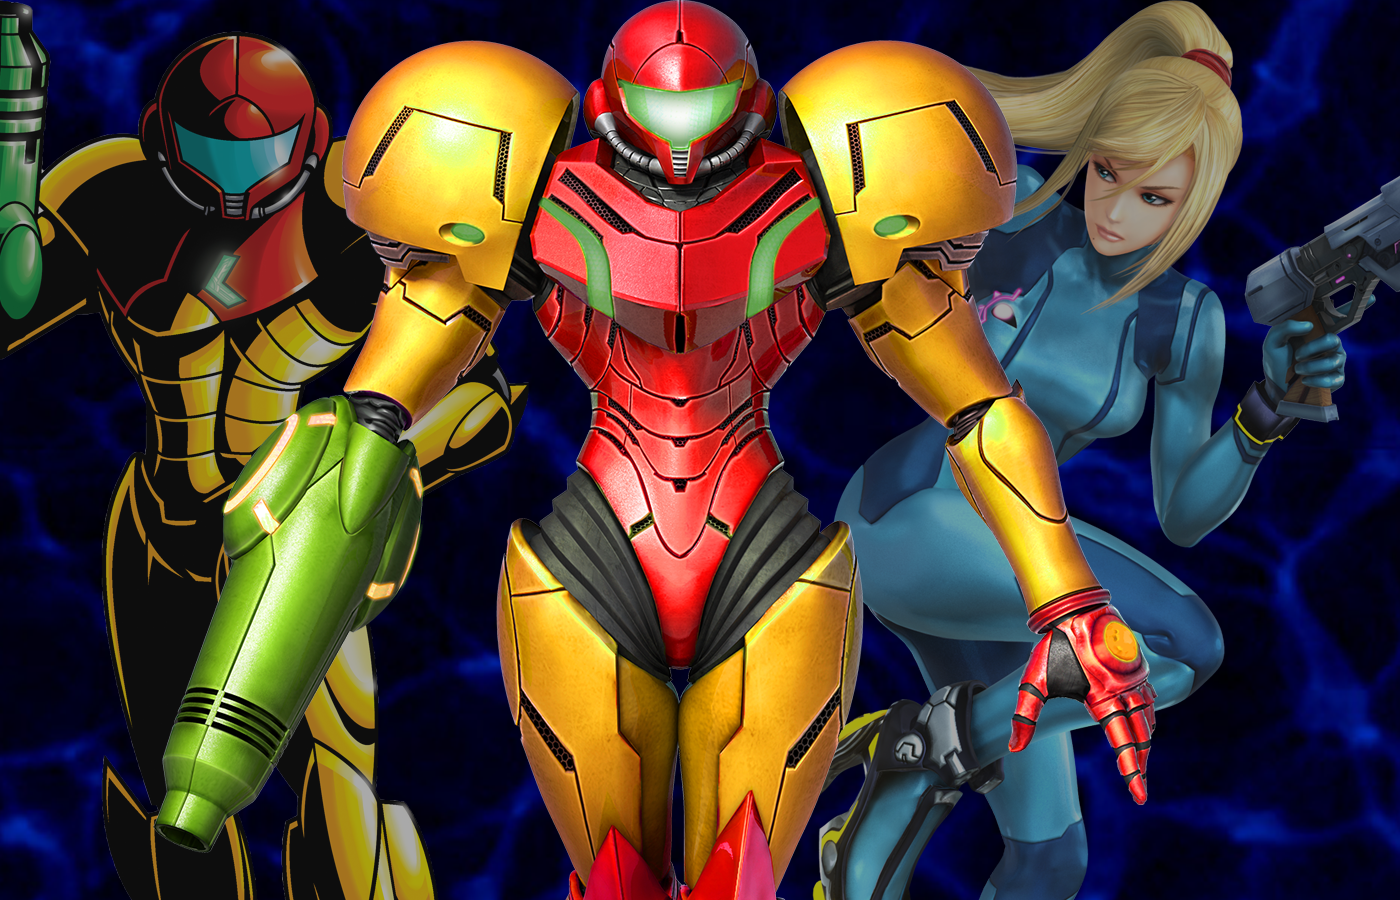 Metroid Dread Popularity Causes Surge In Metroid Game Purchases – Gameranx